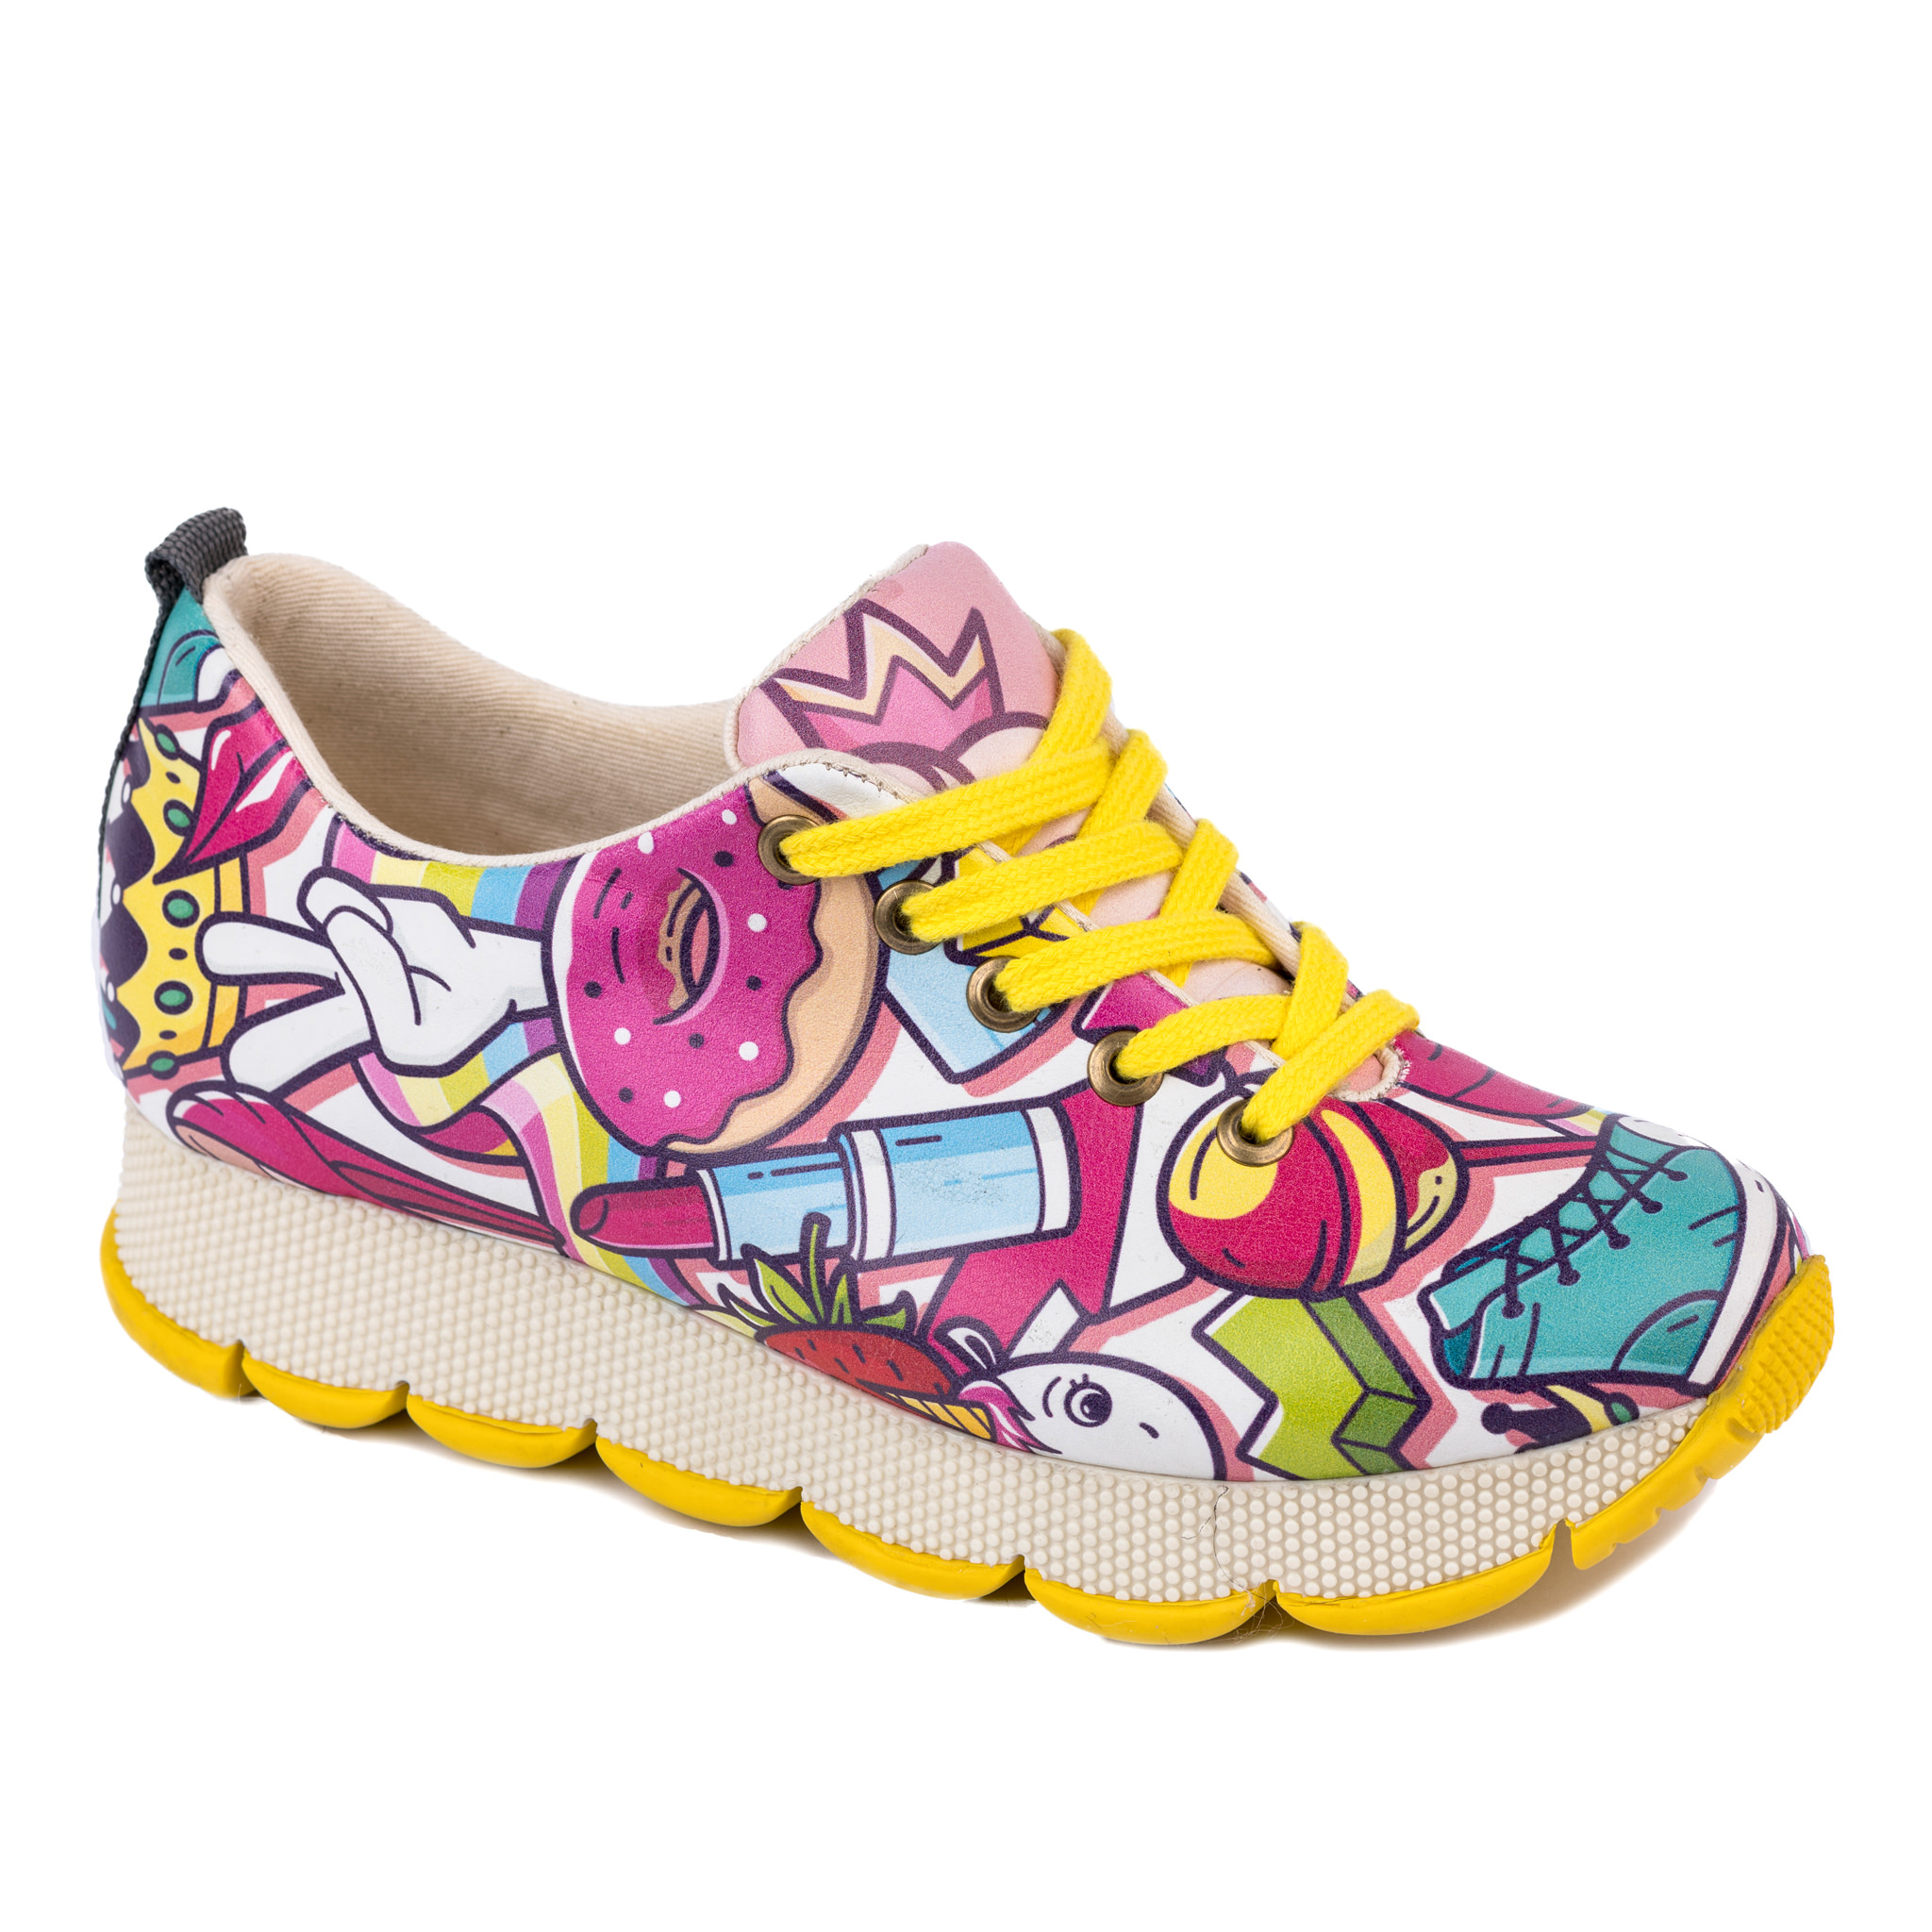 LACE UP PRINTED SNEAKERS - YELLOW/PINK